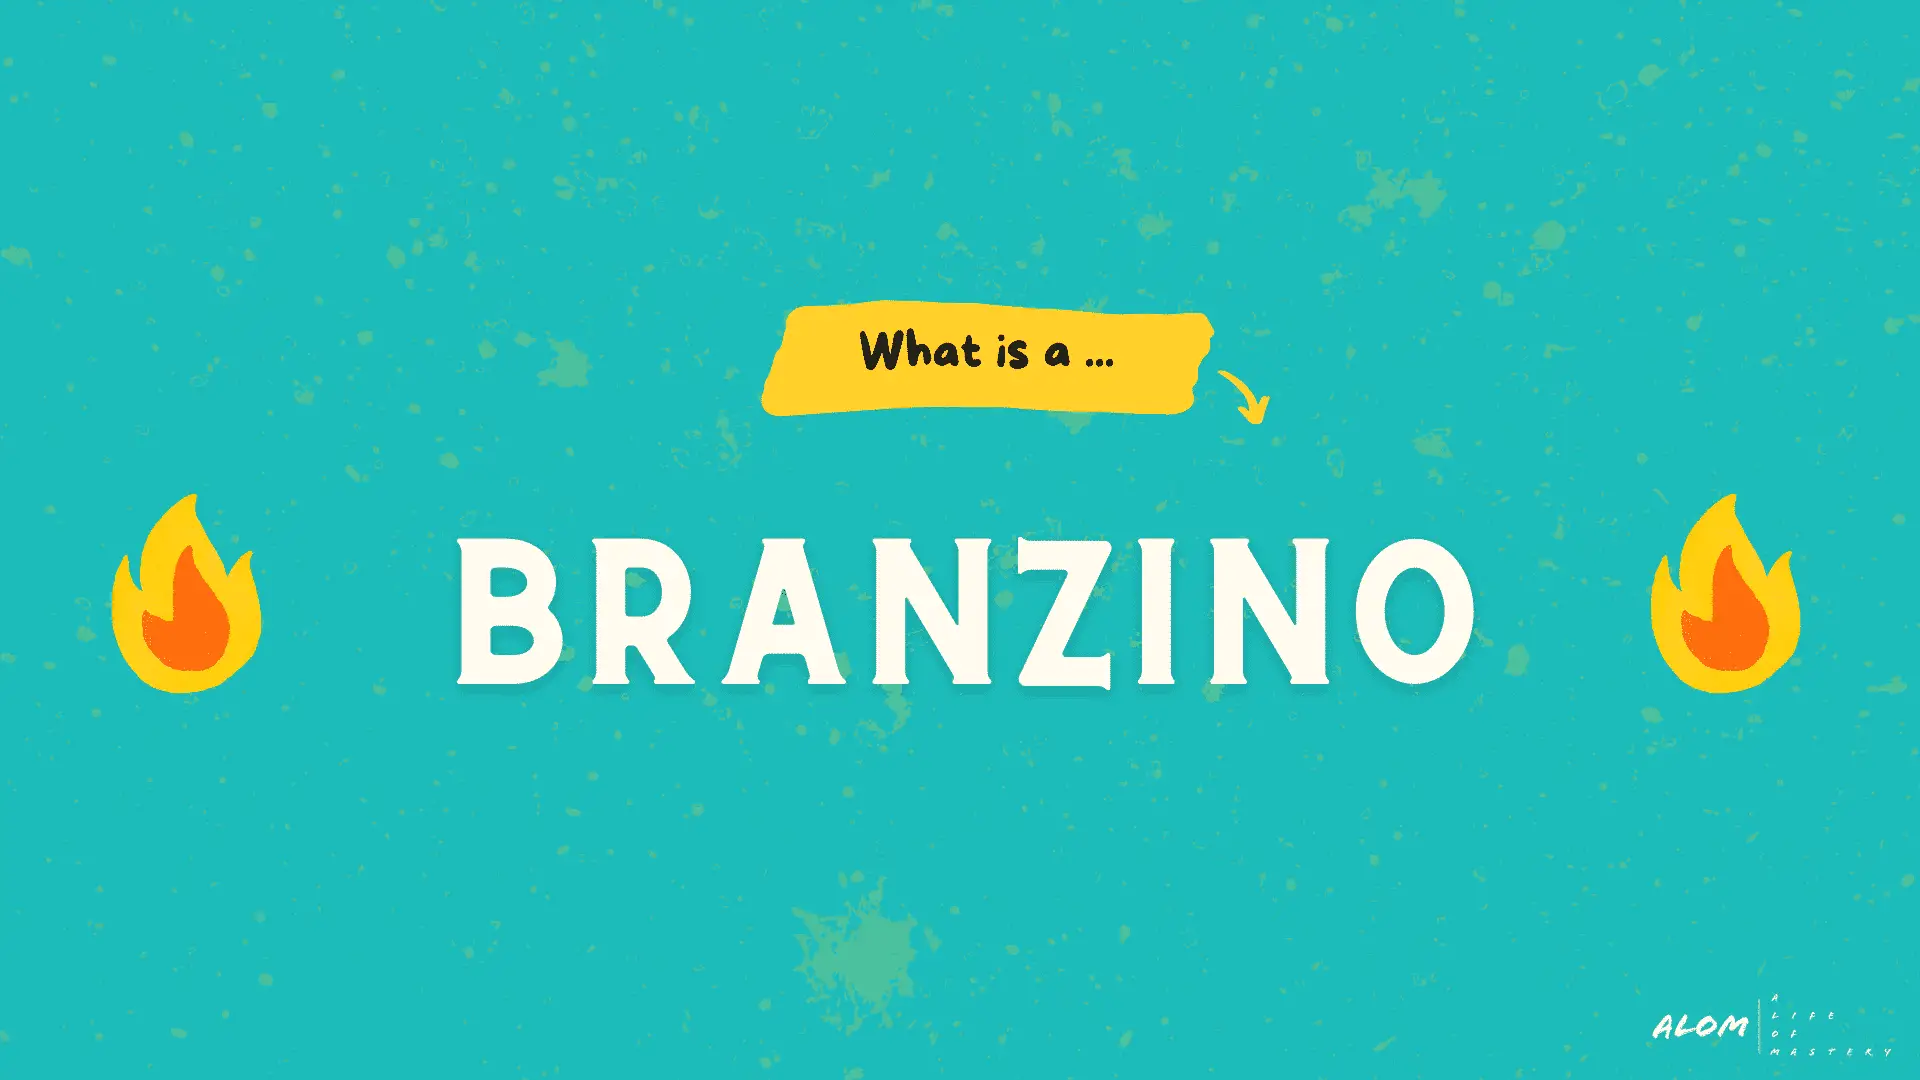 An illustrated title for branzino